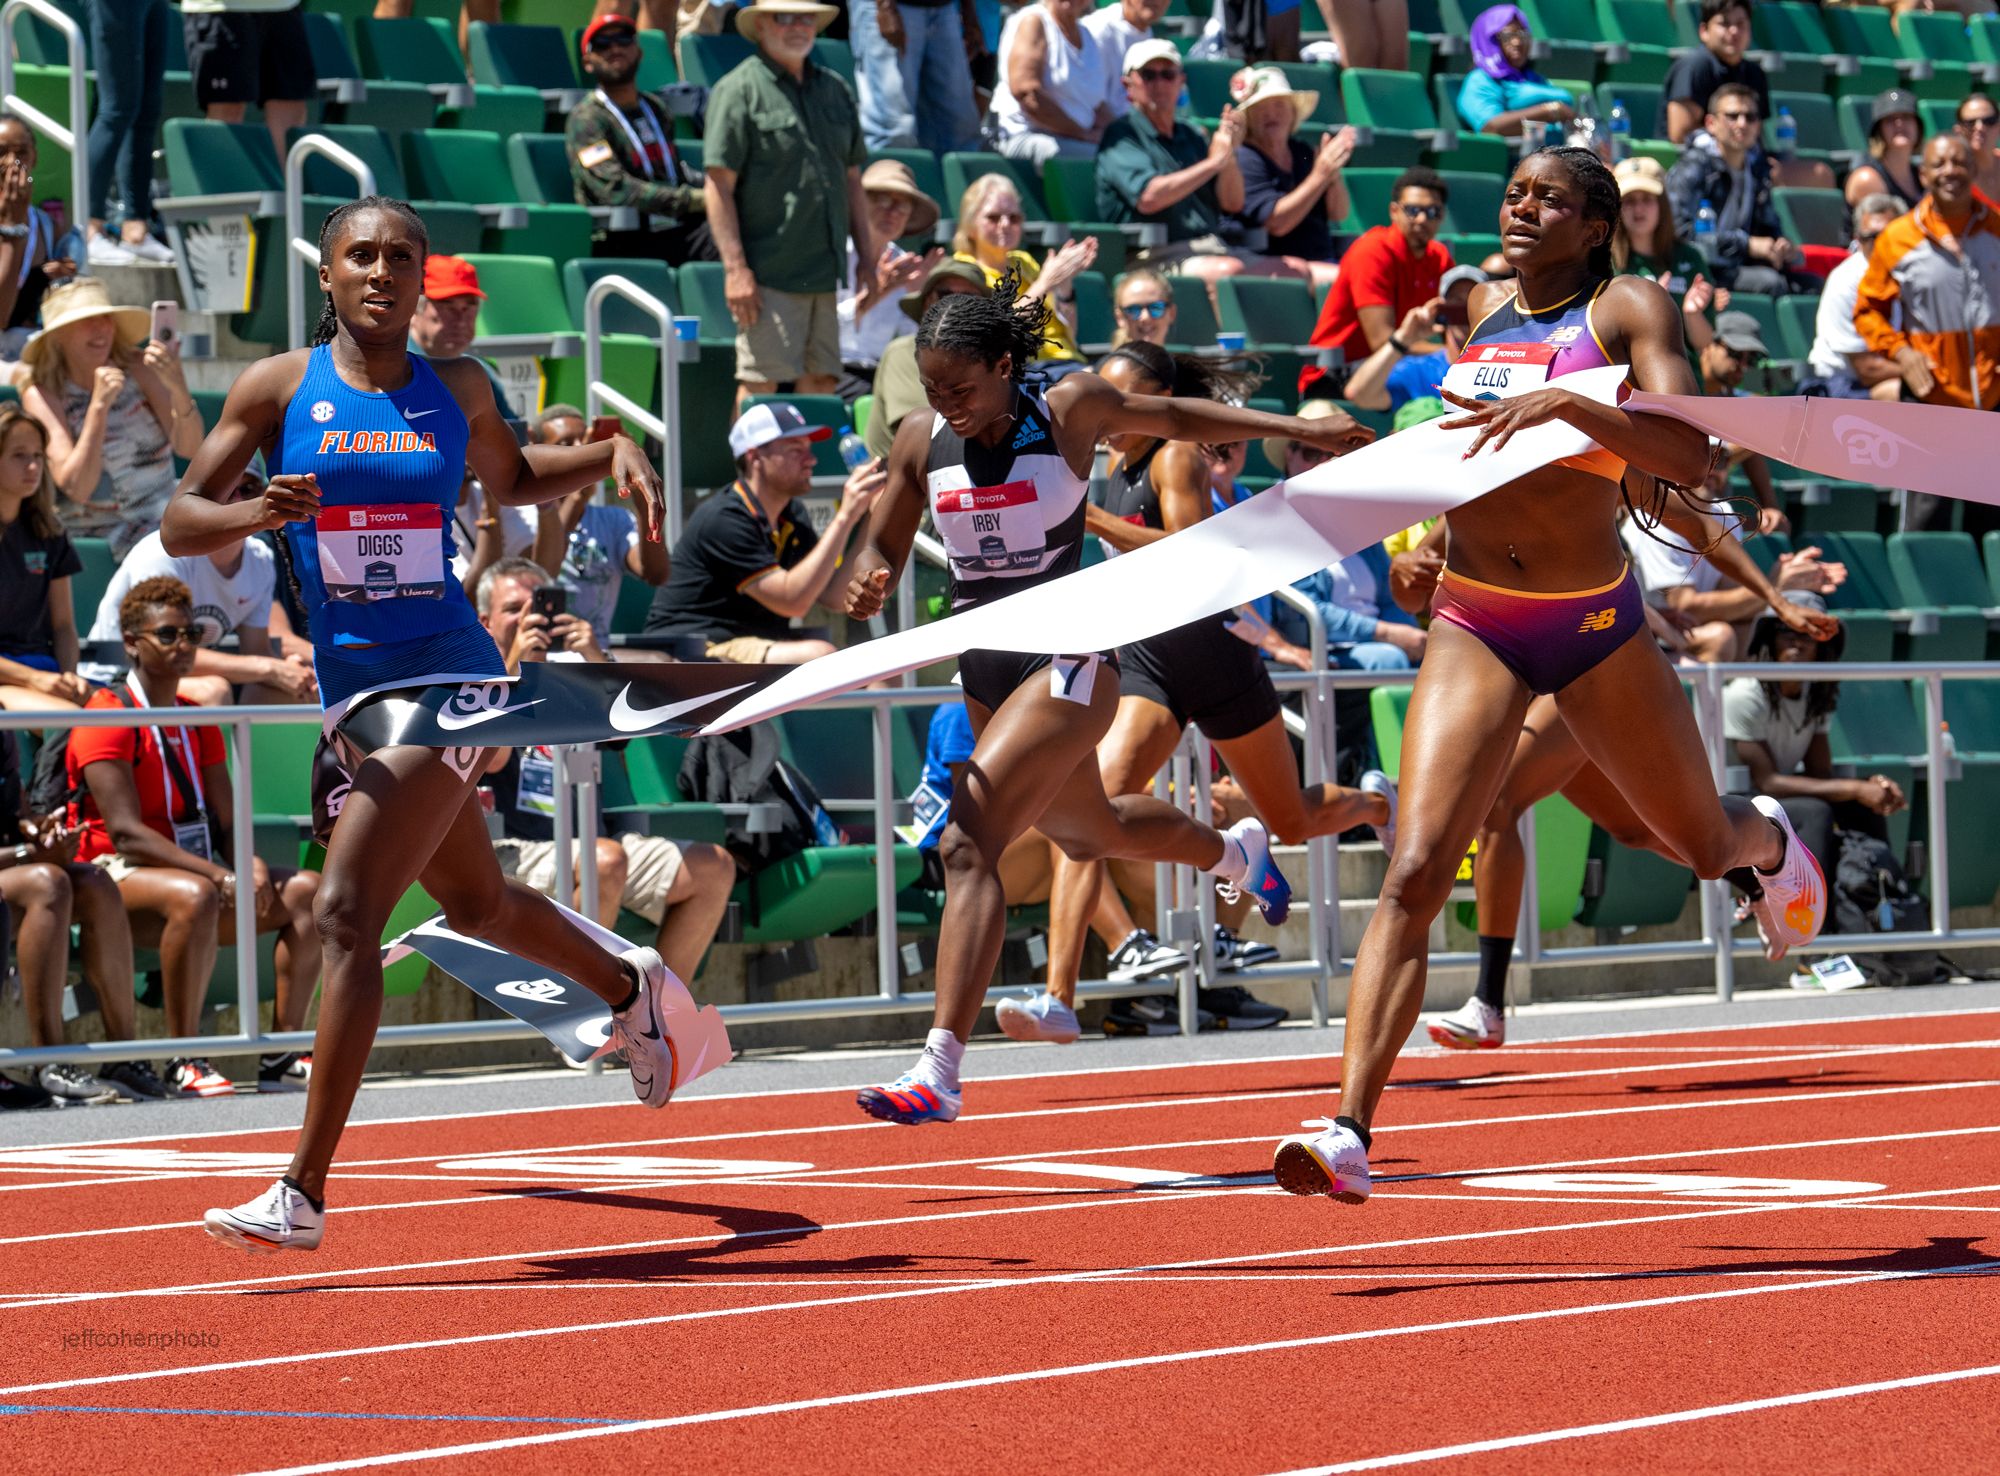 diggs-400w-usatf-outdoors-day-3-2022--3679-jeff-cohen-photo---copy-web.jpg